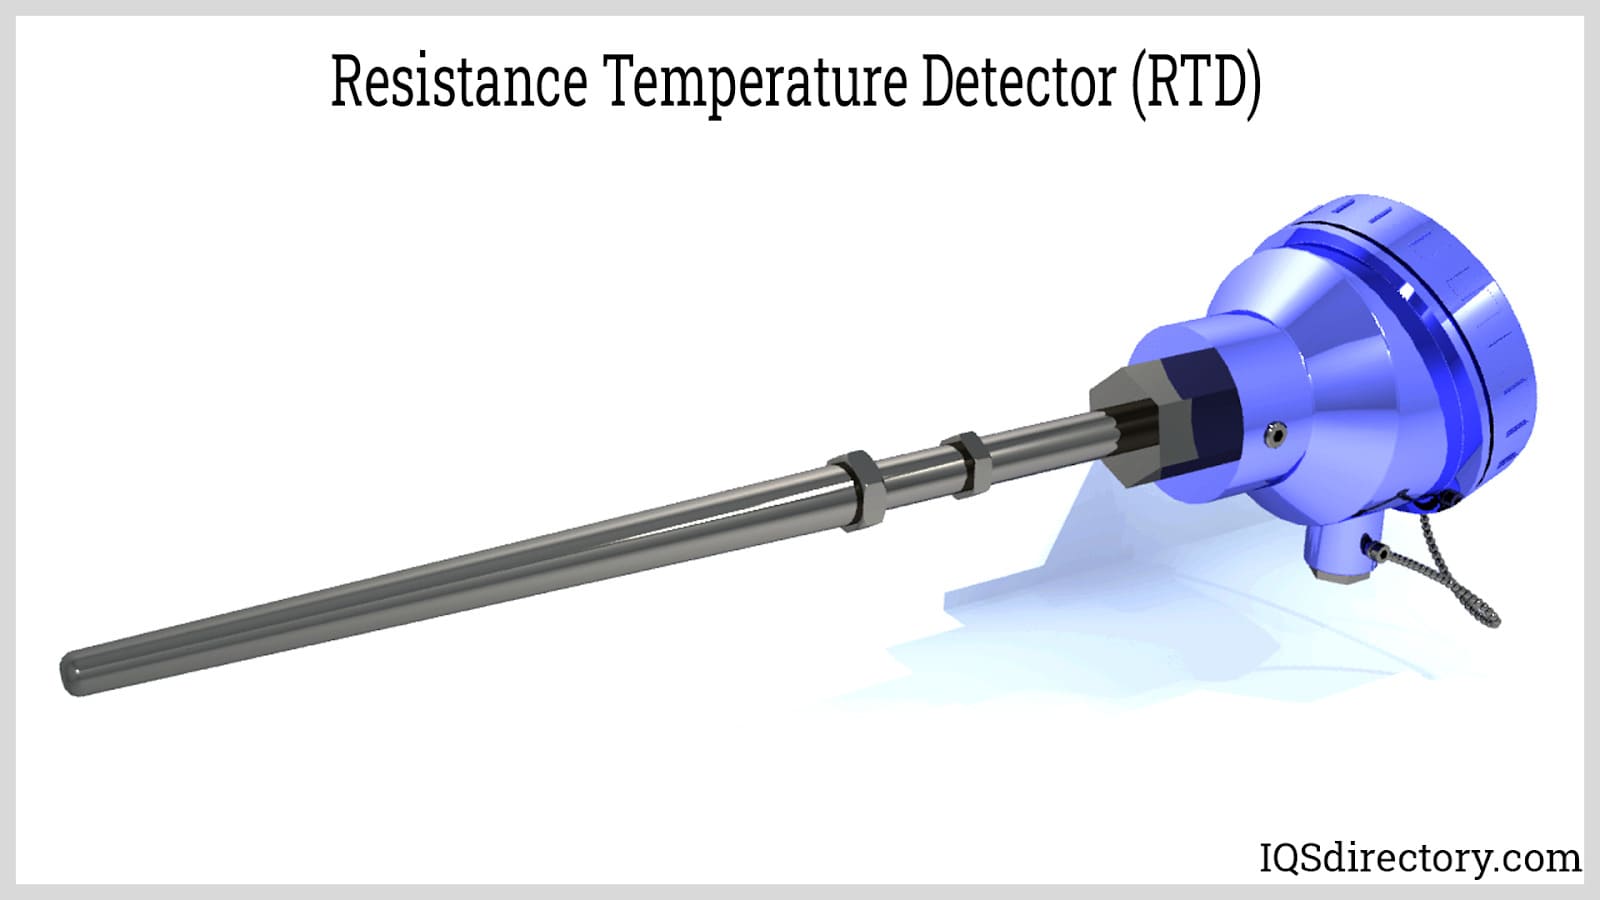 RTD Sensor: What Is It? How Does It Work? Types, Uses